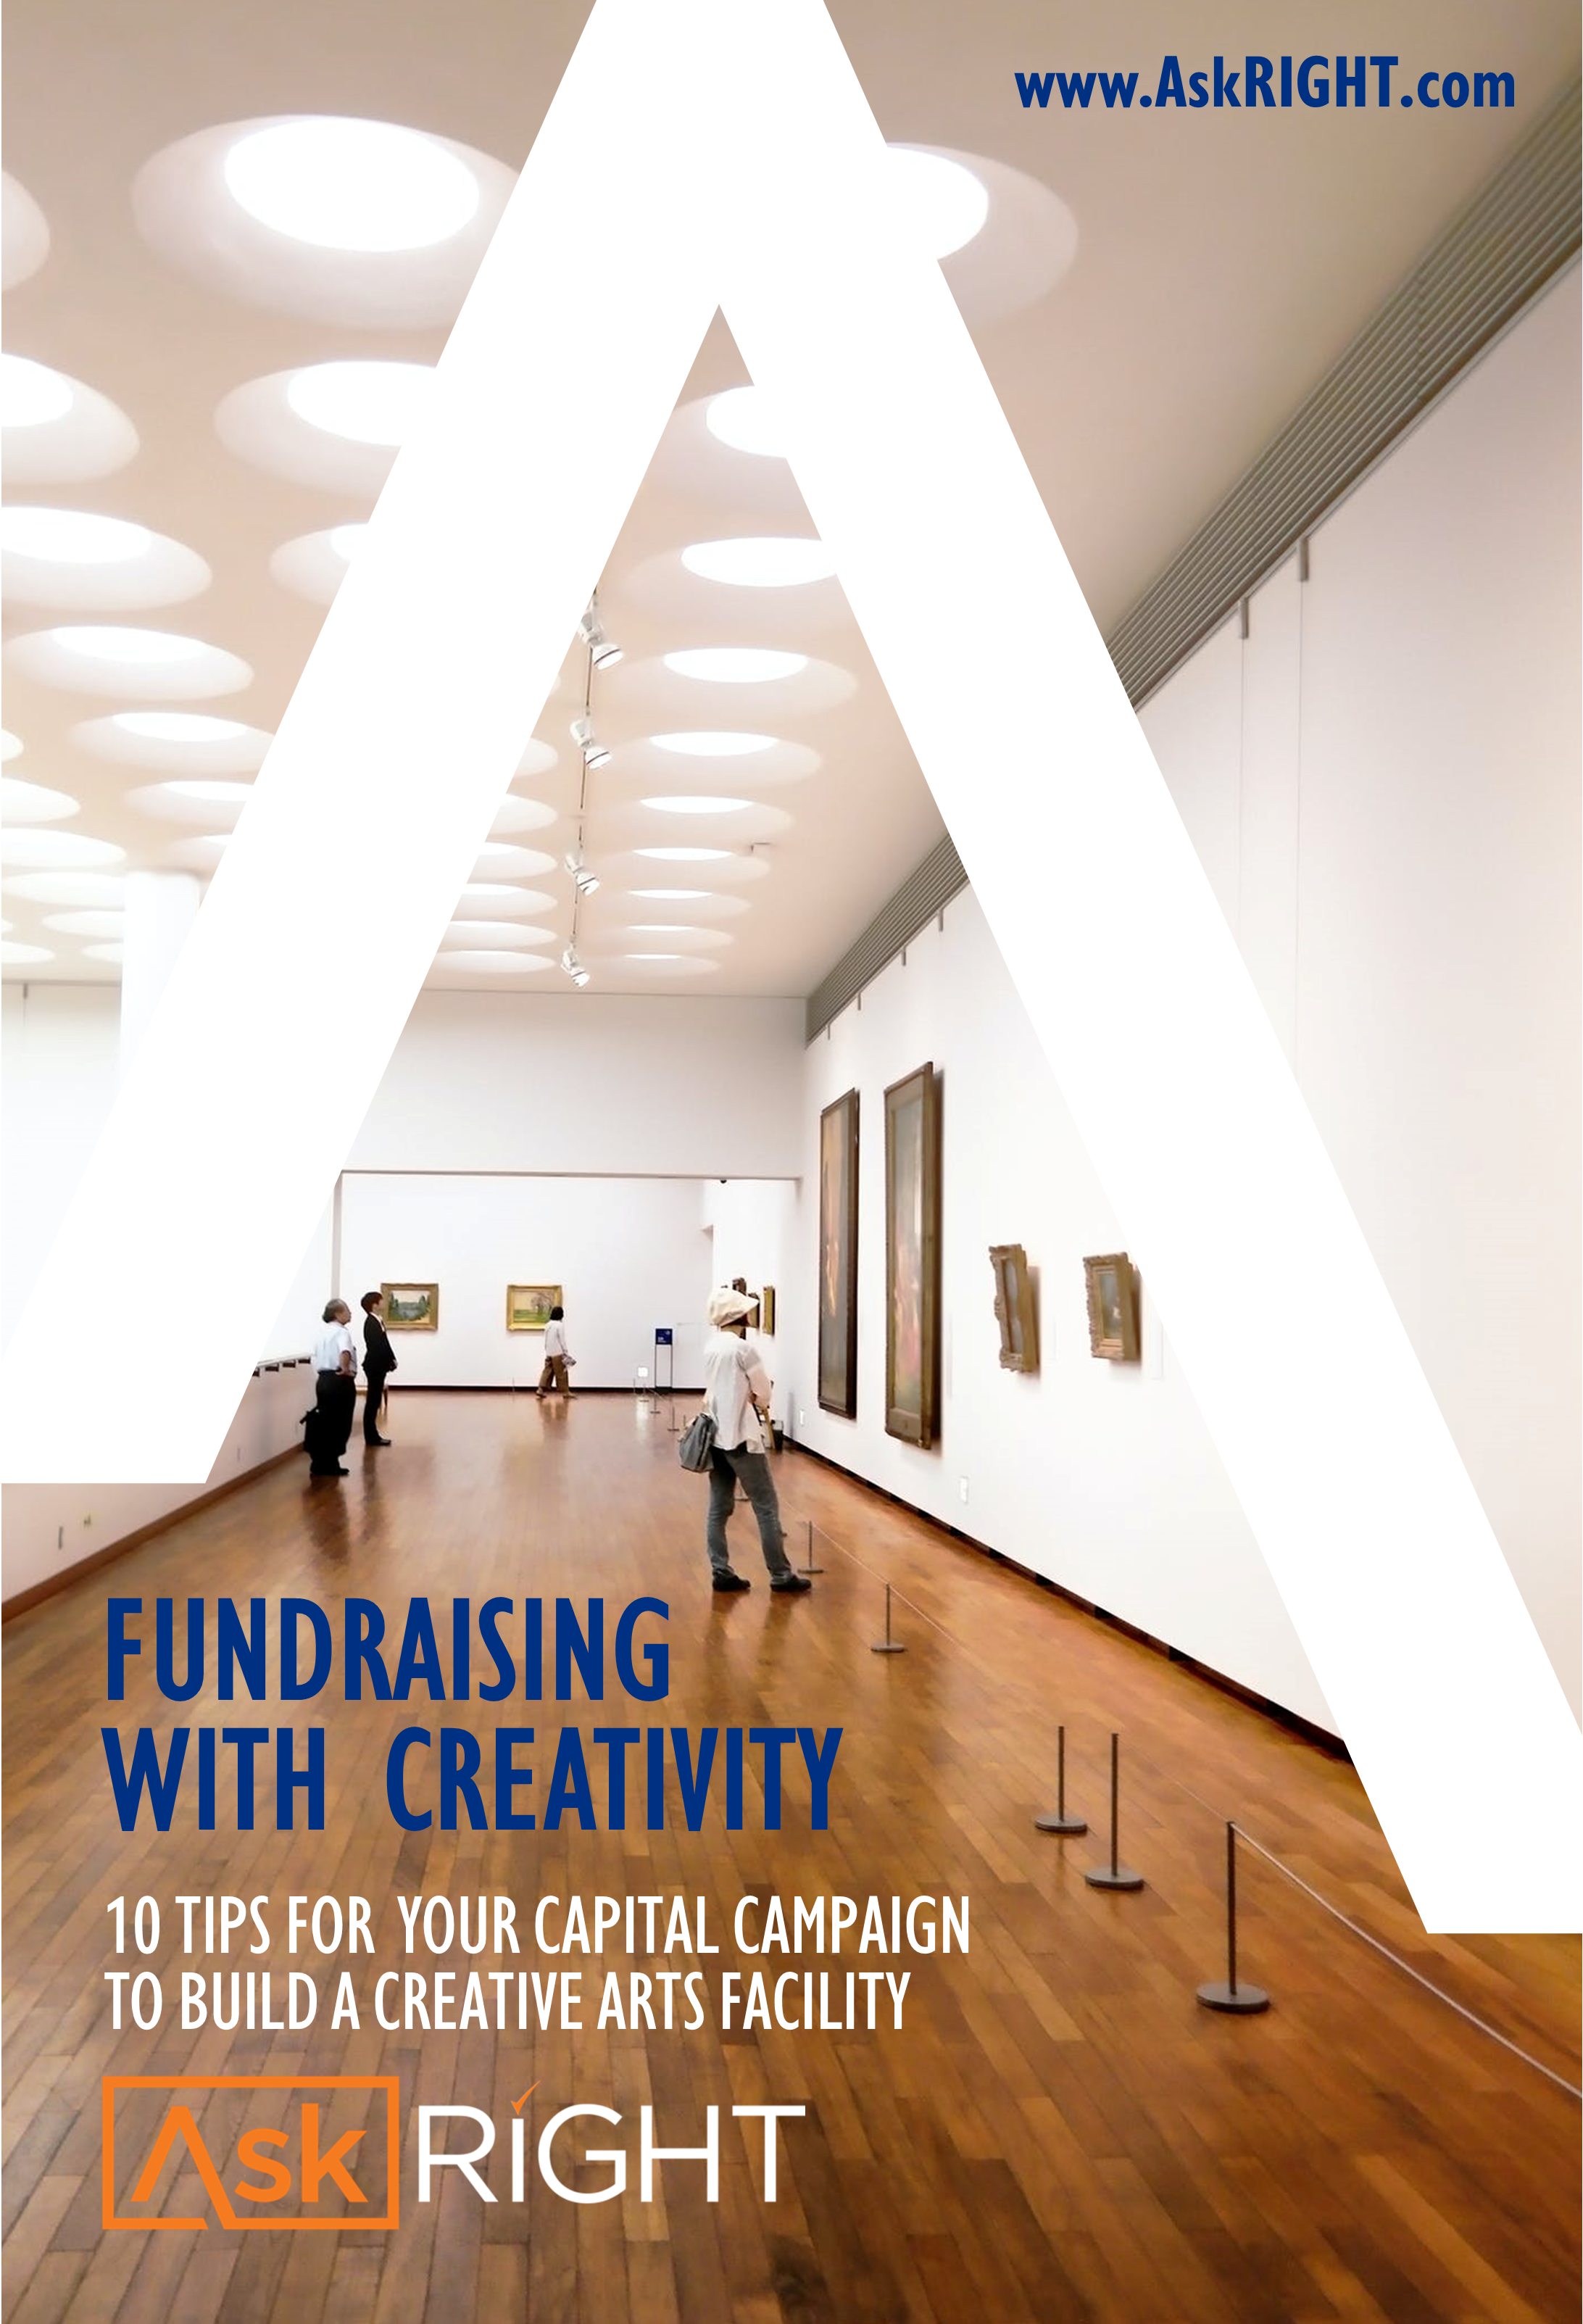 Fundraising with creativity: 10 tips for building your capital campaign to build a creative arts facility